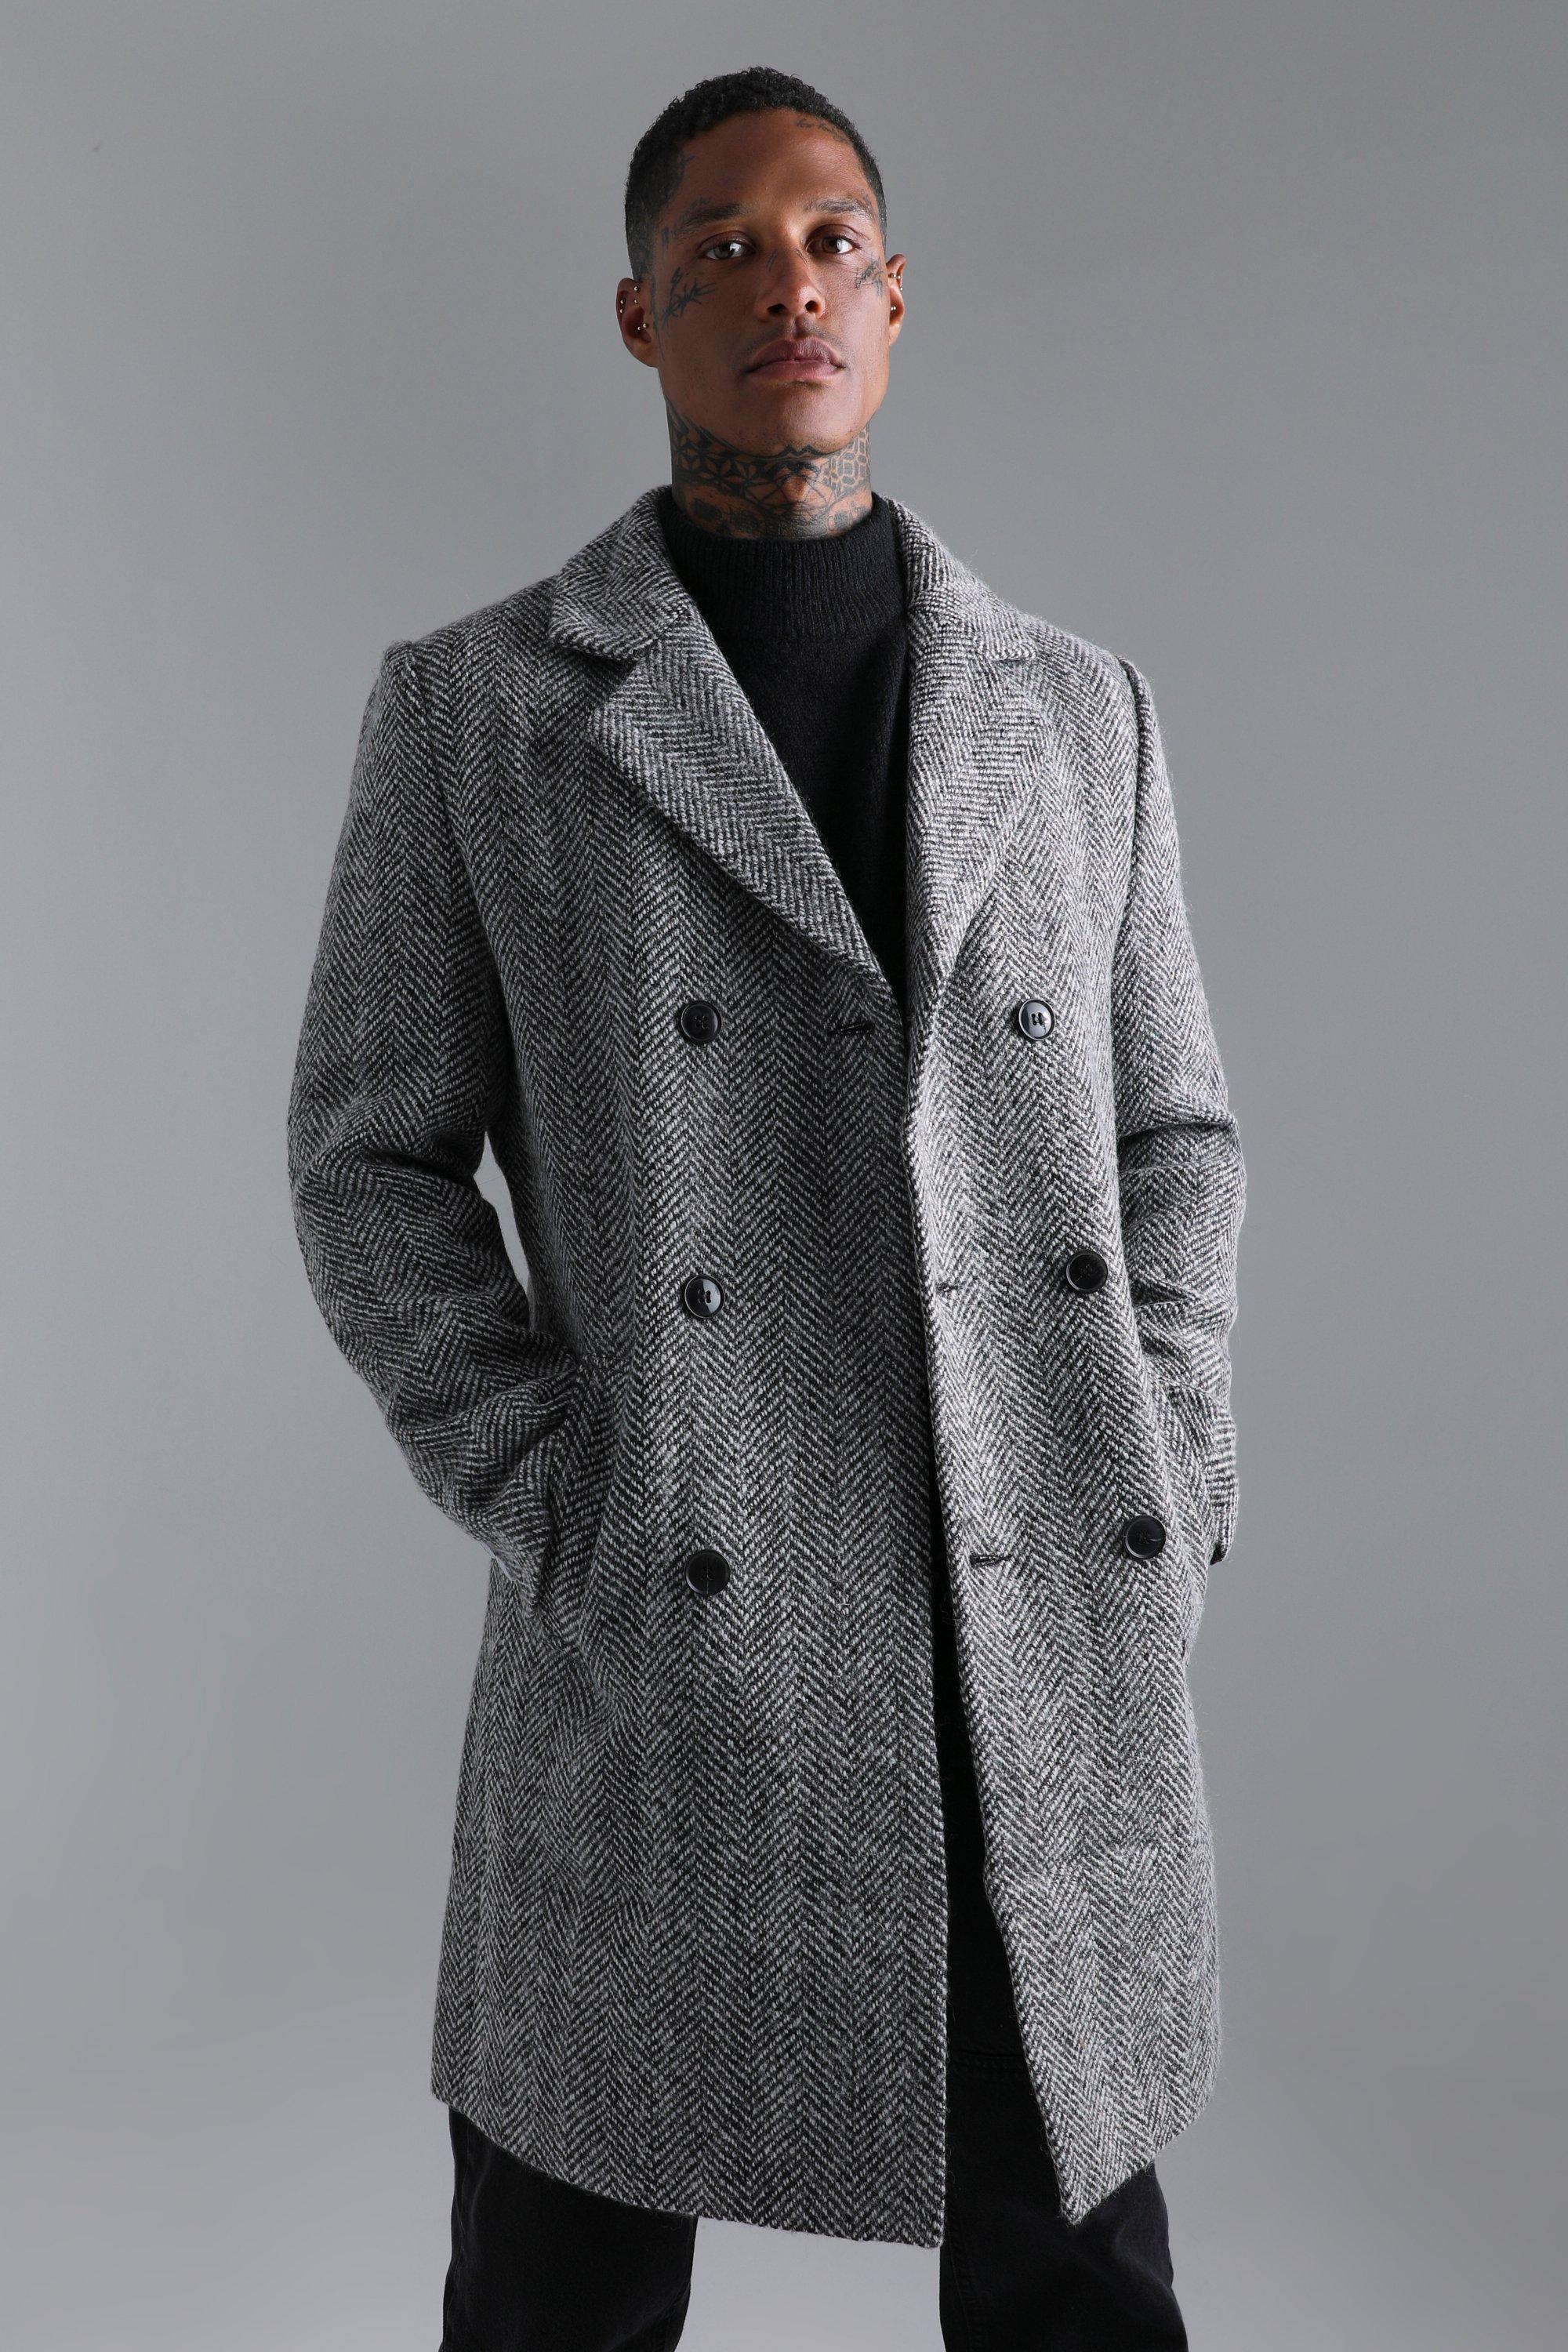 The Other Me Mens Coat Gray Black CP6004, 55% OFF